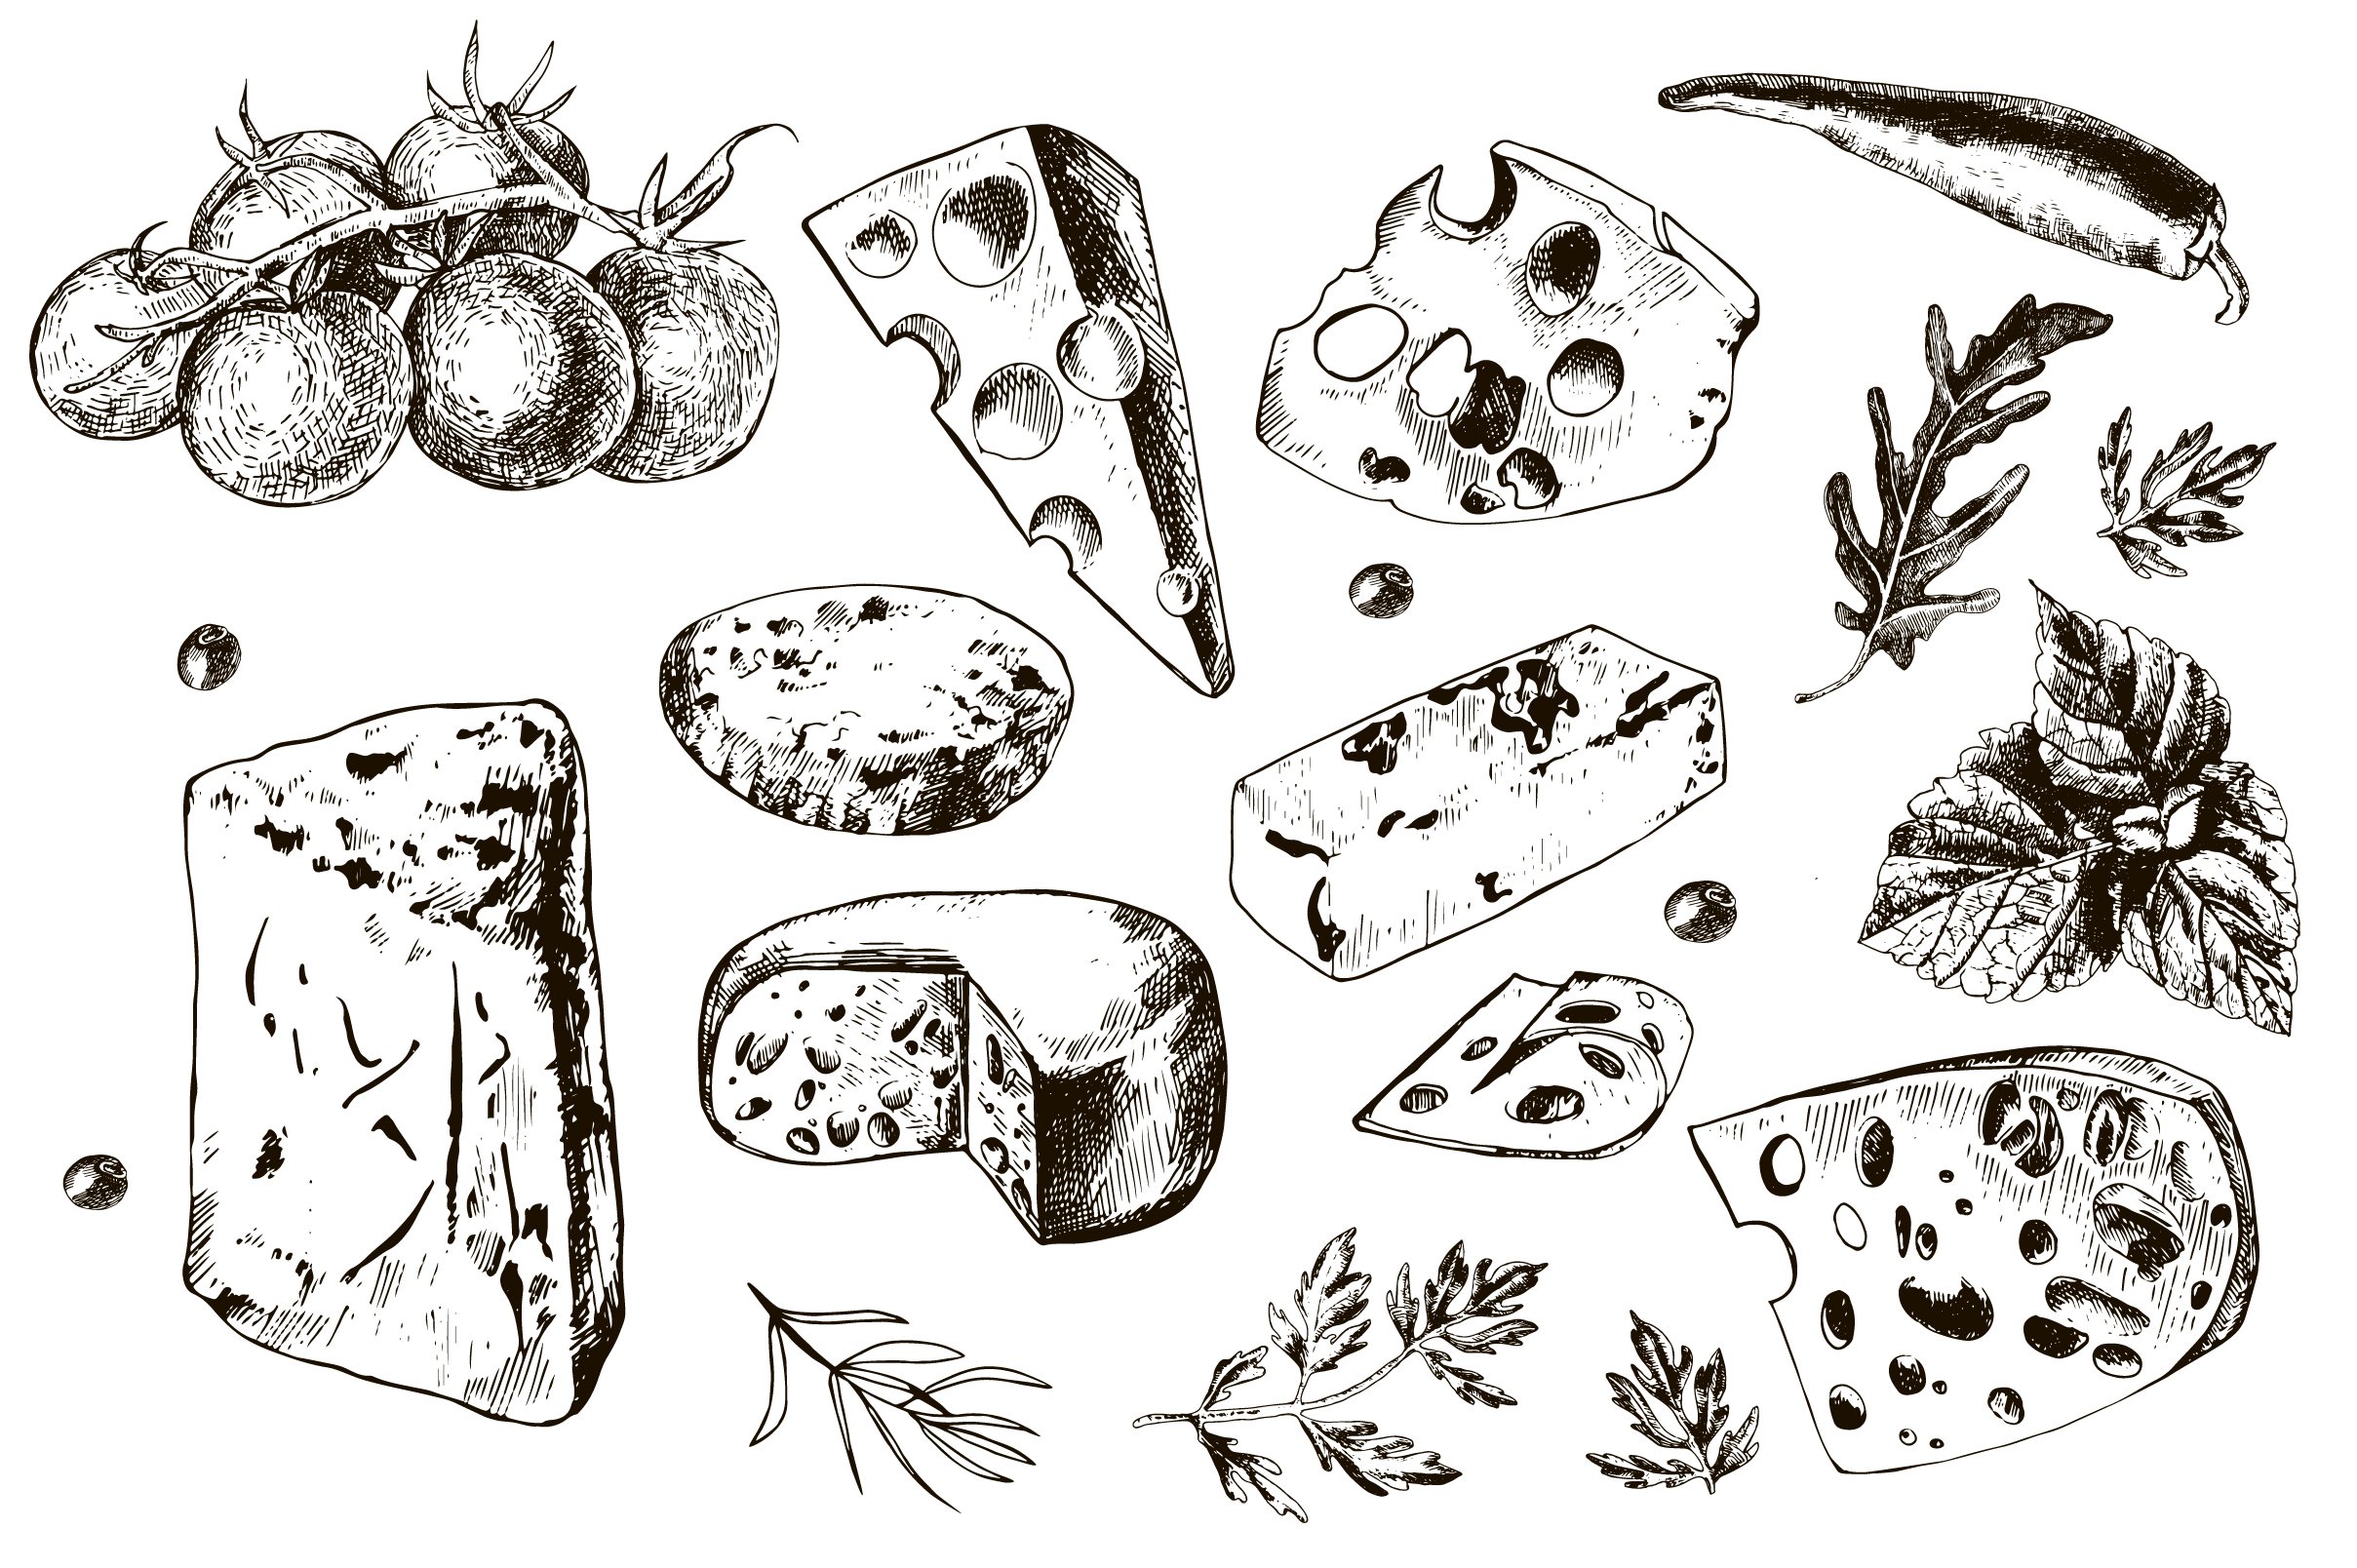 Image of varieties of hard cheese and vegetables drawn by pencils.